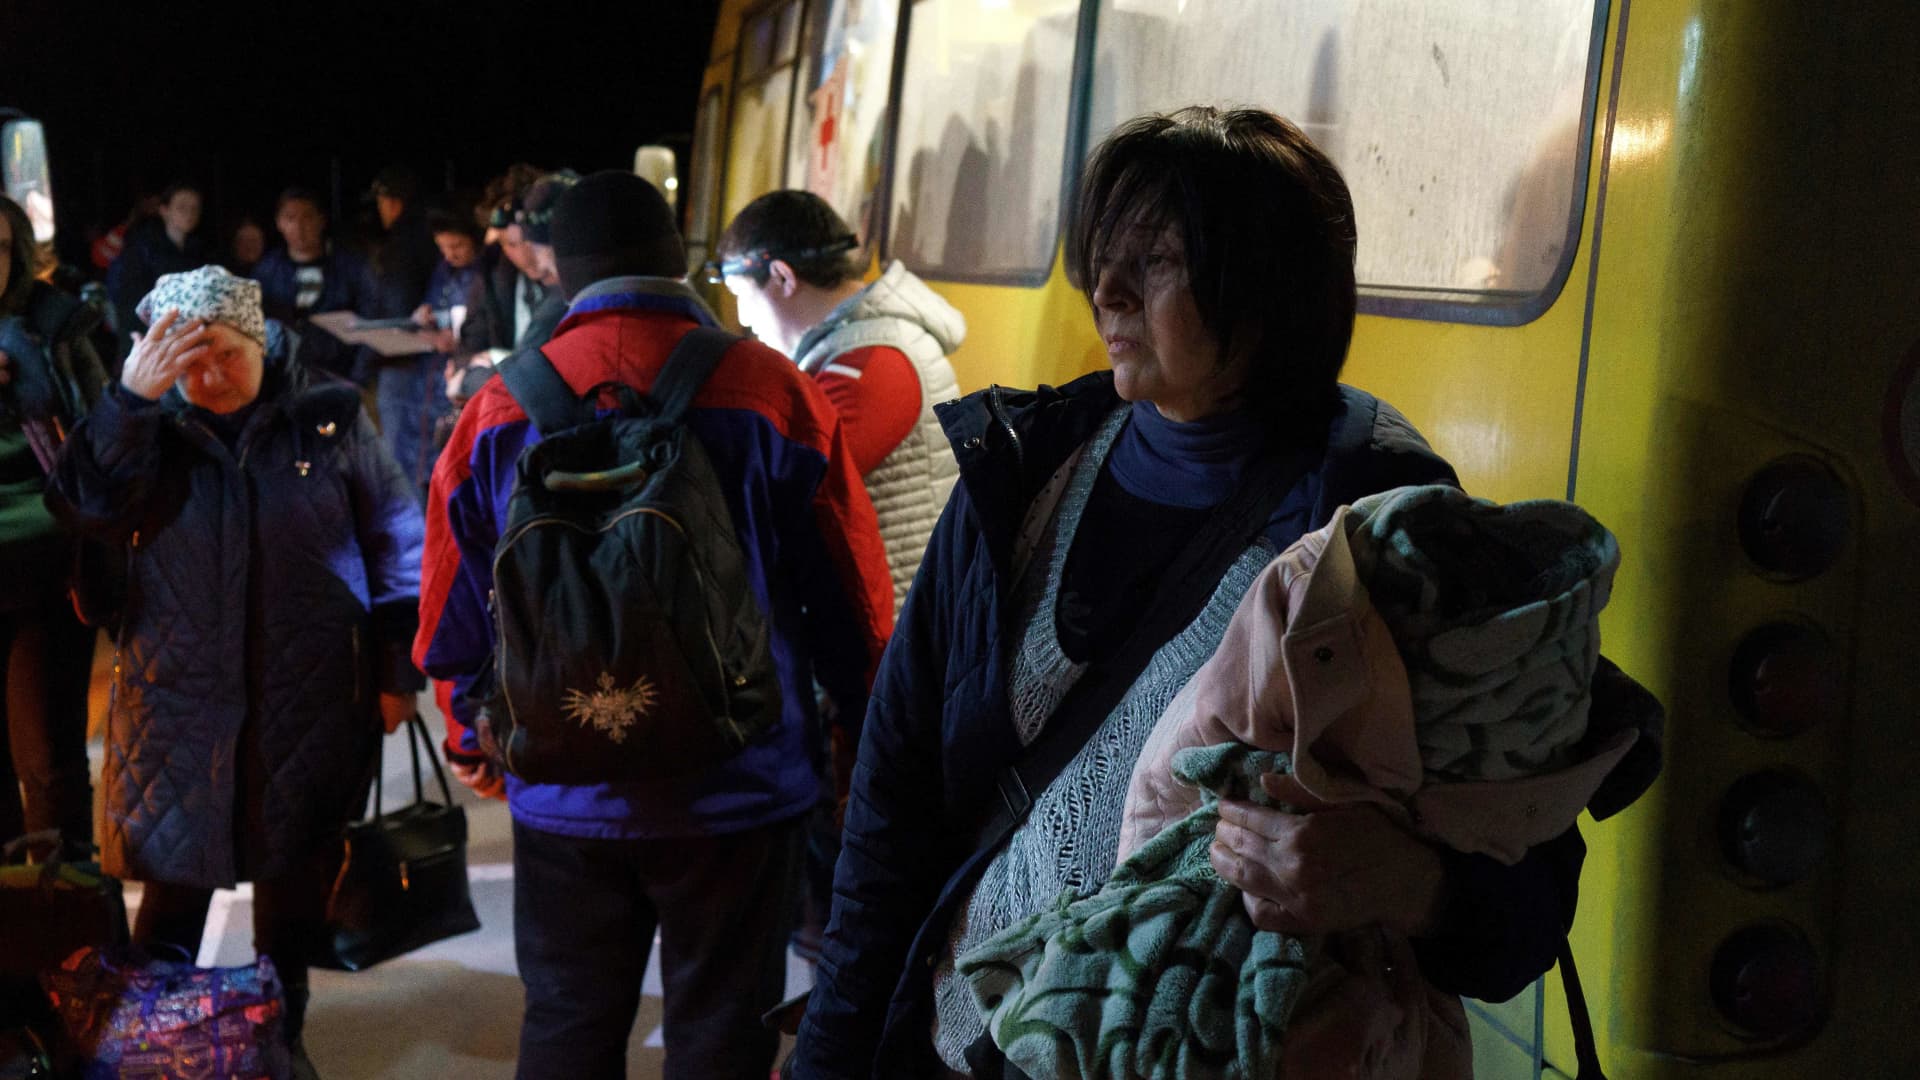 Passengers disembark as a convoy of 30 buses carrying evacuees from Mariupol and Melitopol arrive at the registration center in Zaporizhzhia, on April 1, 2022.